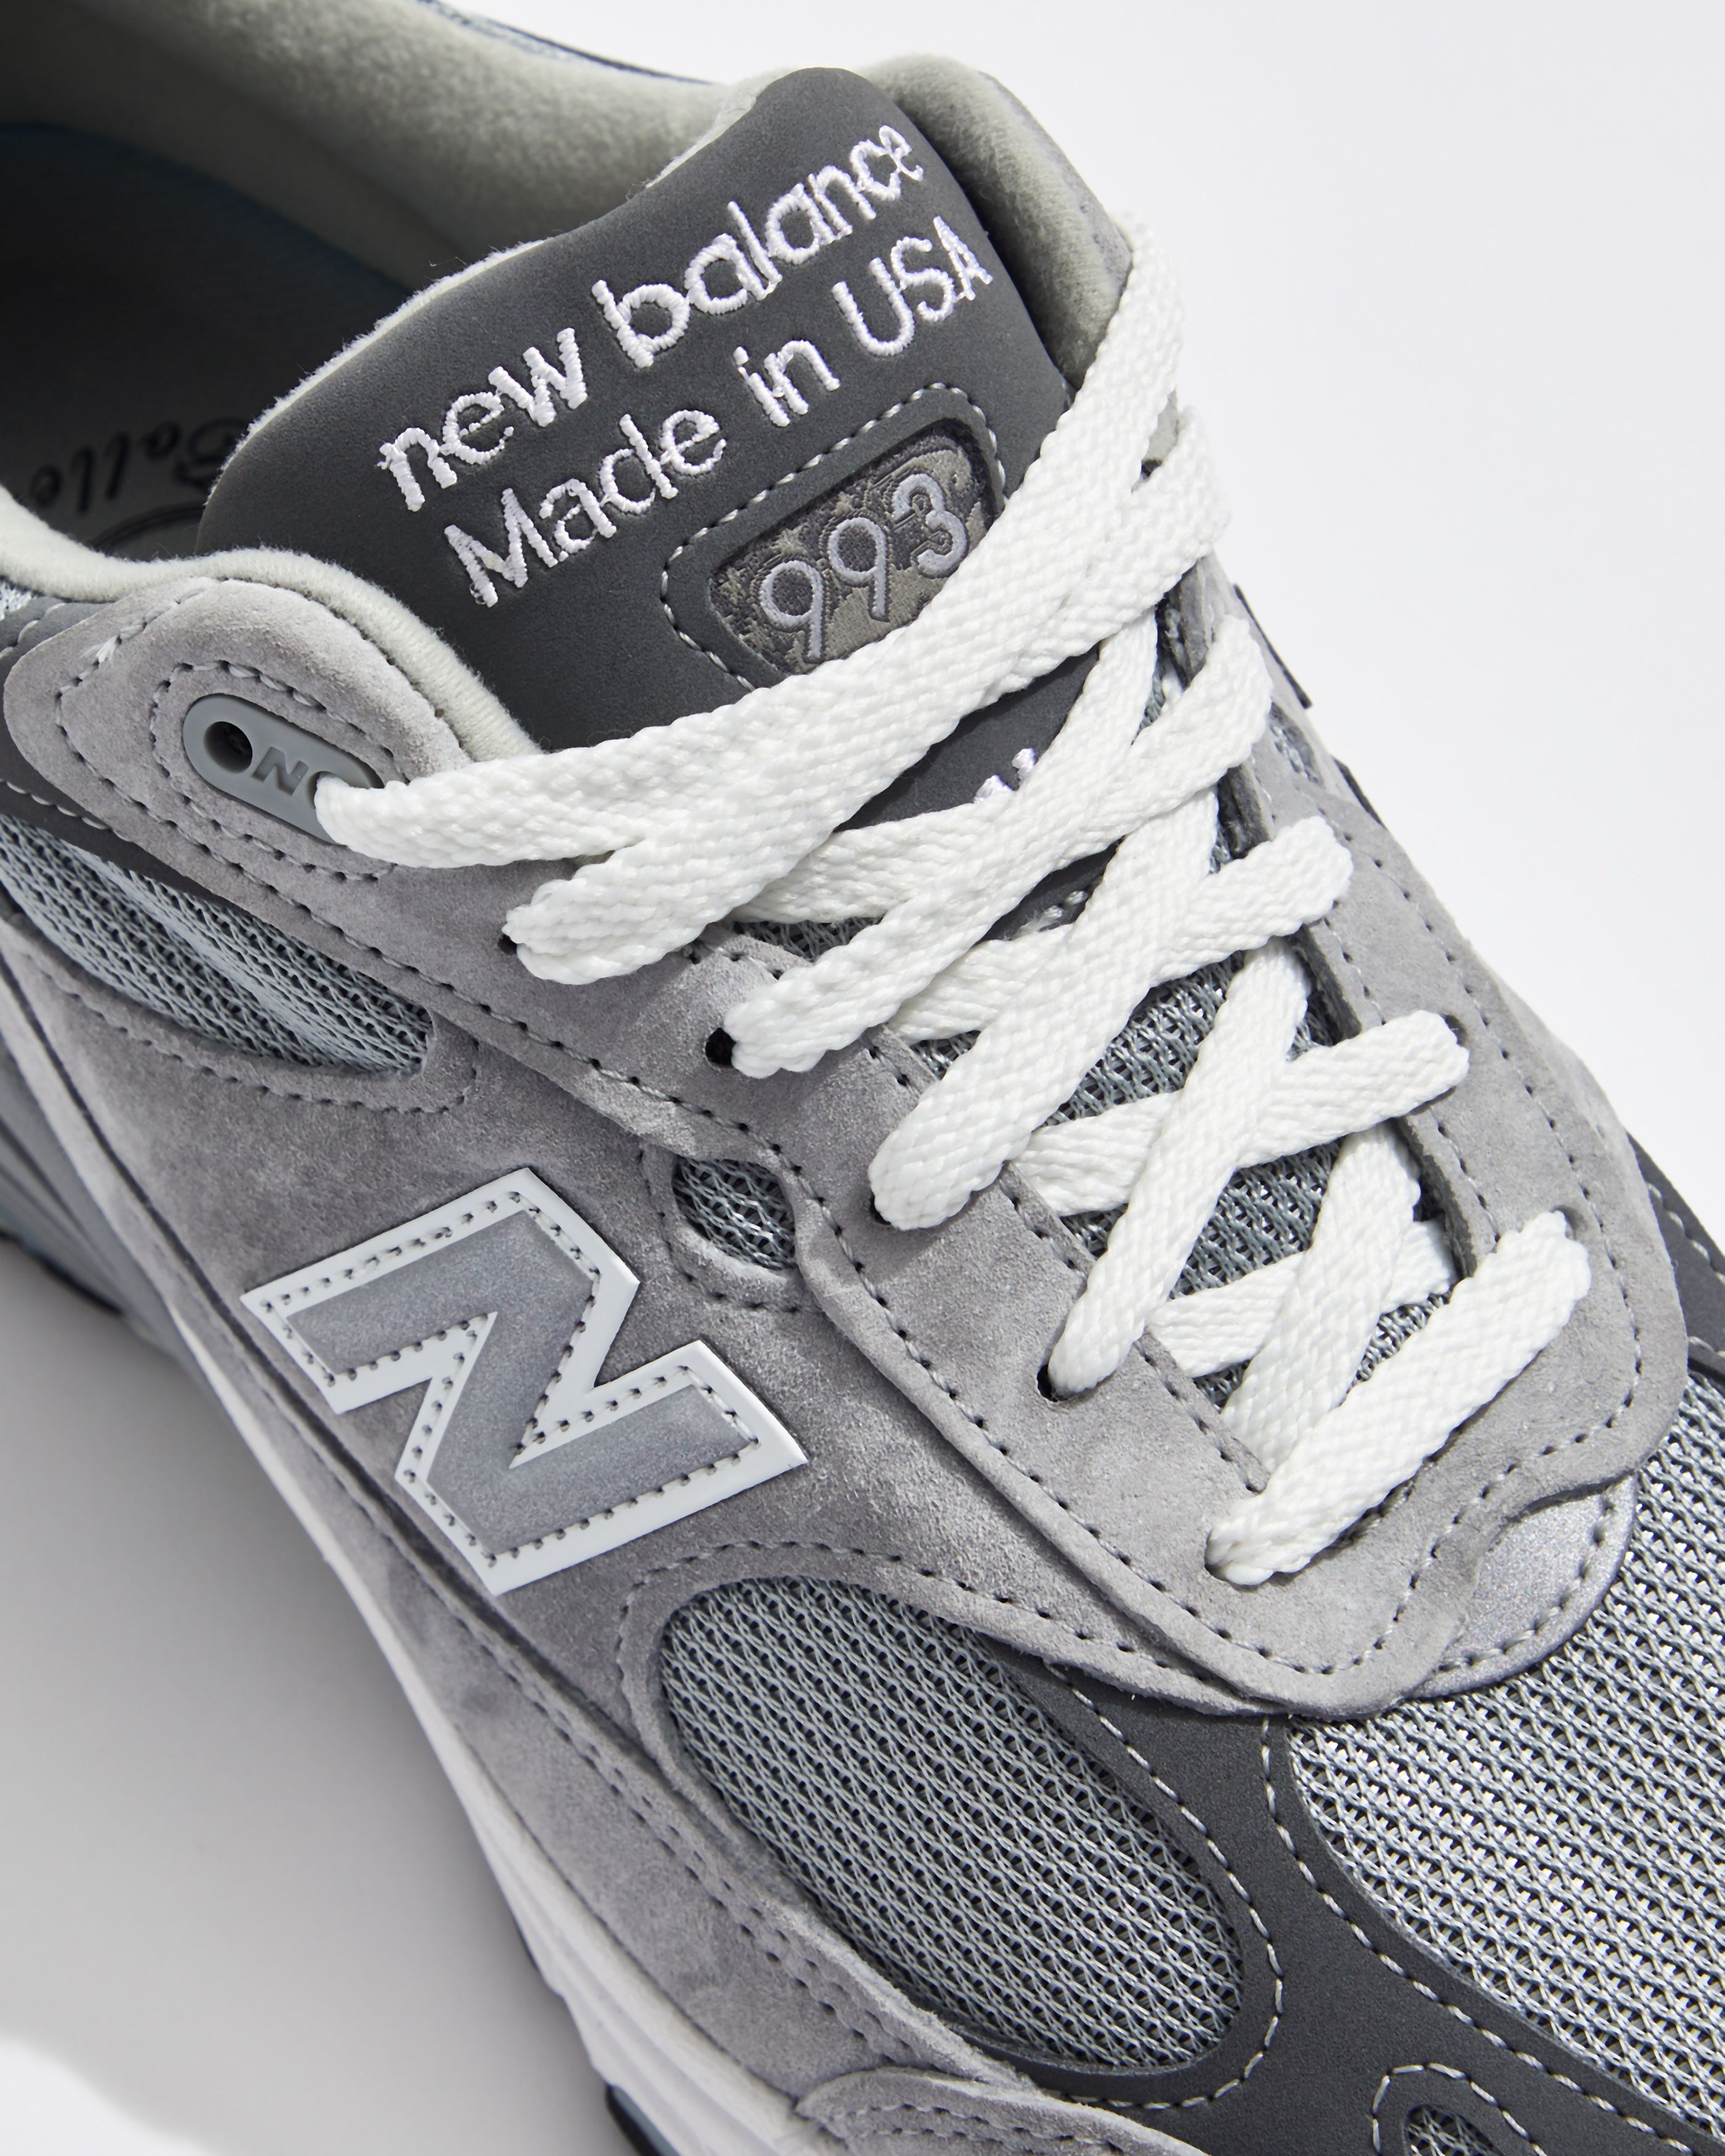 new balance 993 review